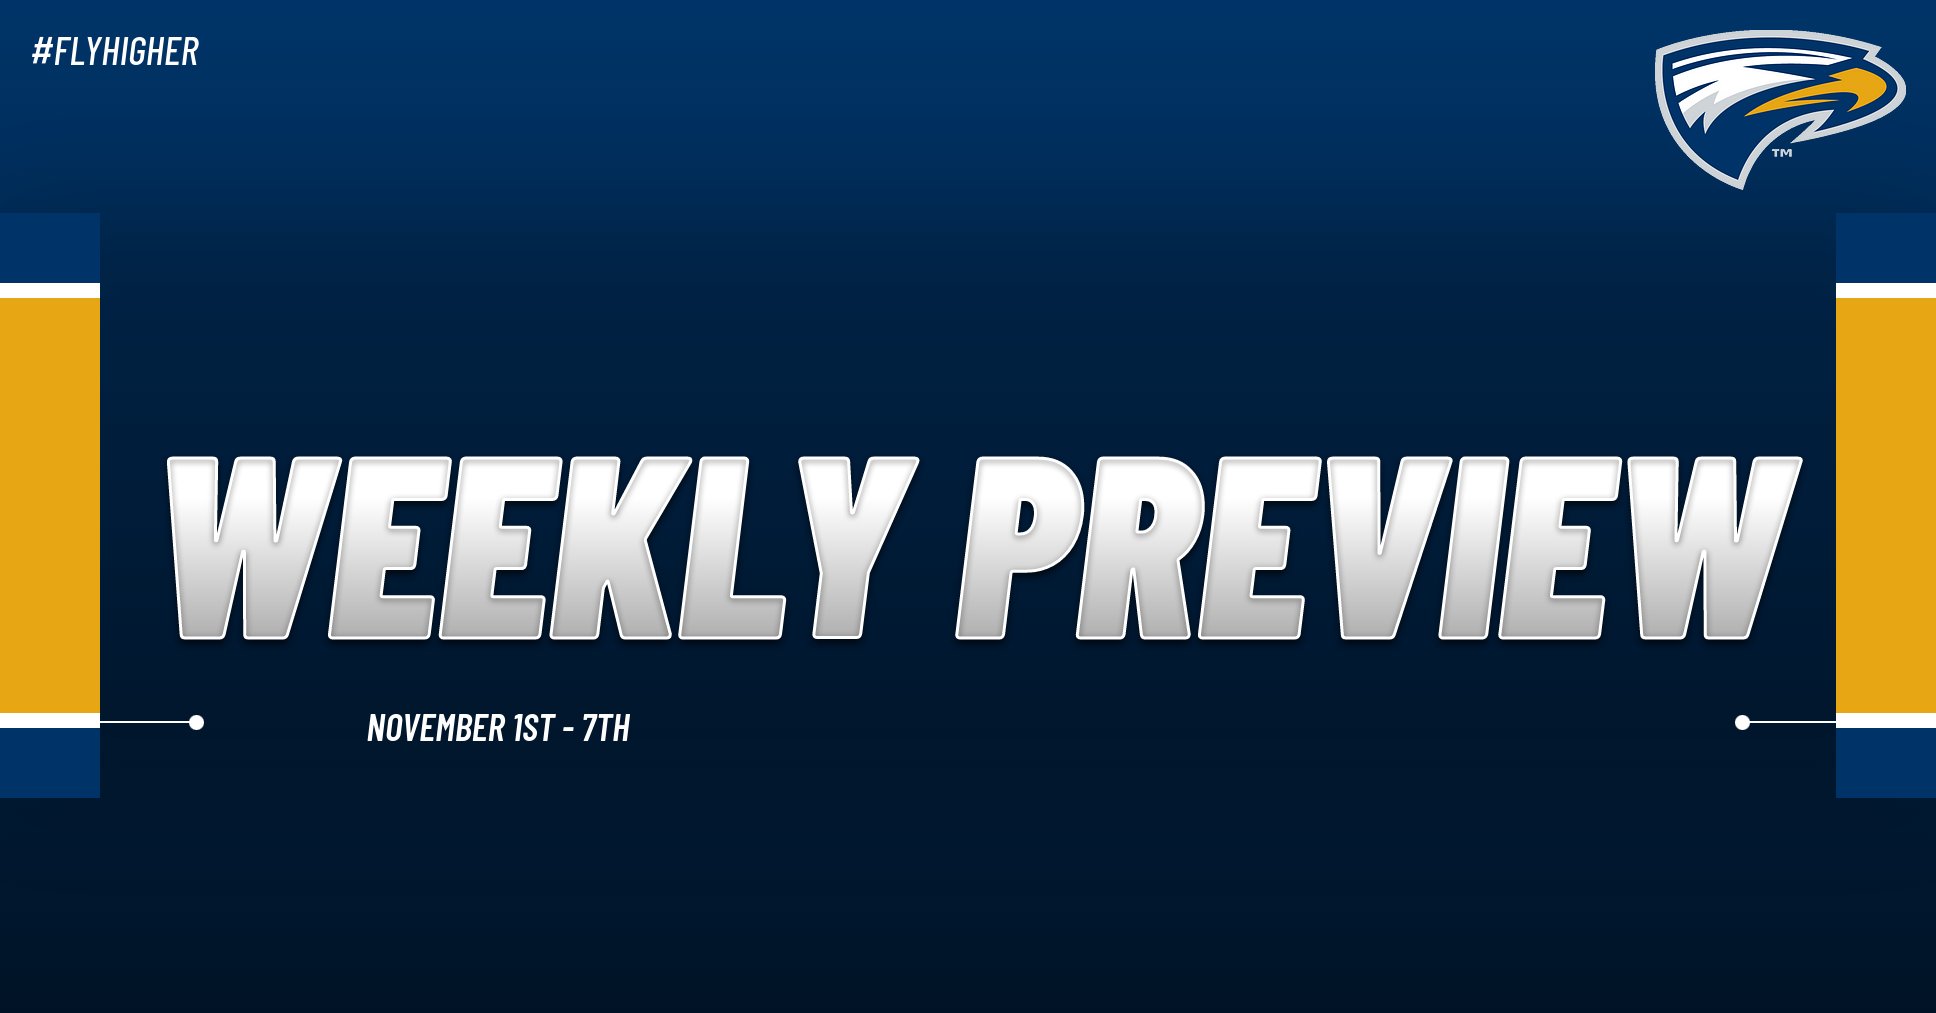 Emory Athletics Weekly Preview - November 1st - 7th